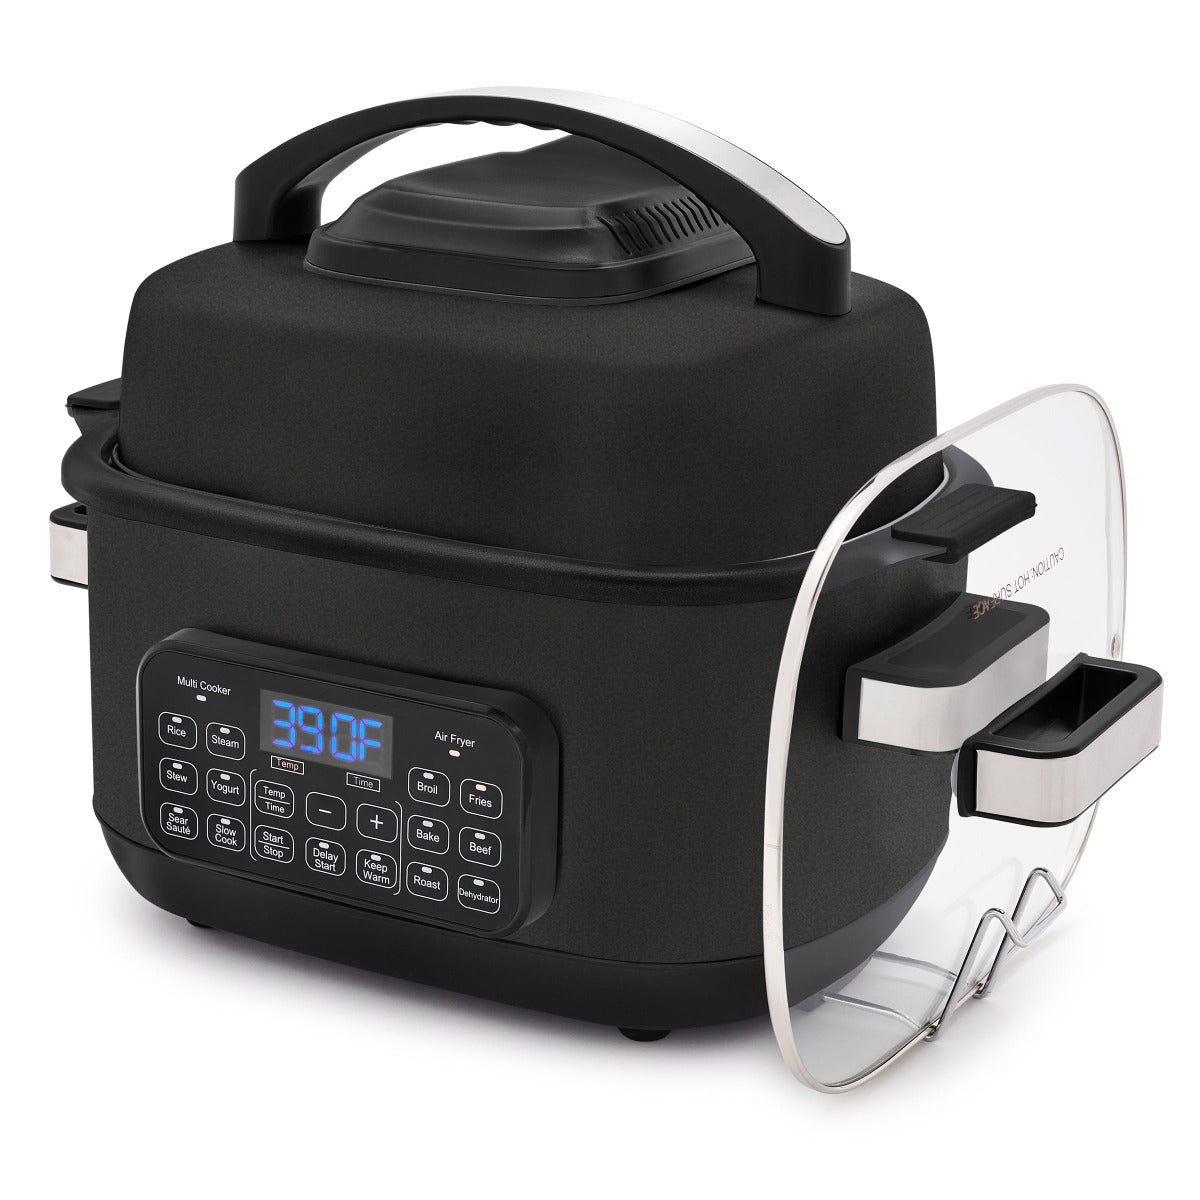  Stainless Steel Air Fryer - Non-Toxic, Healthy Cooking